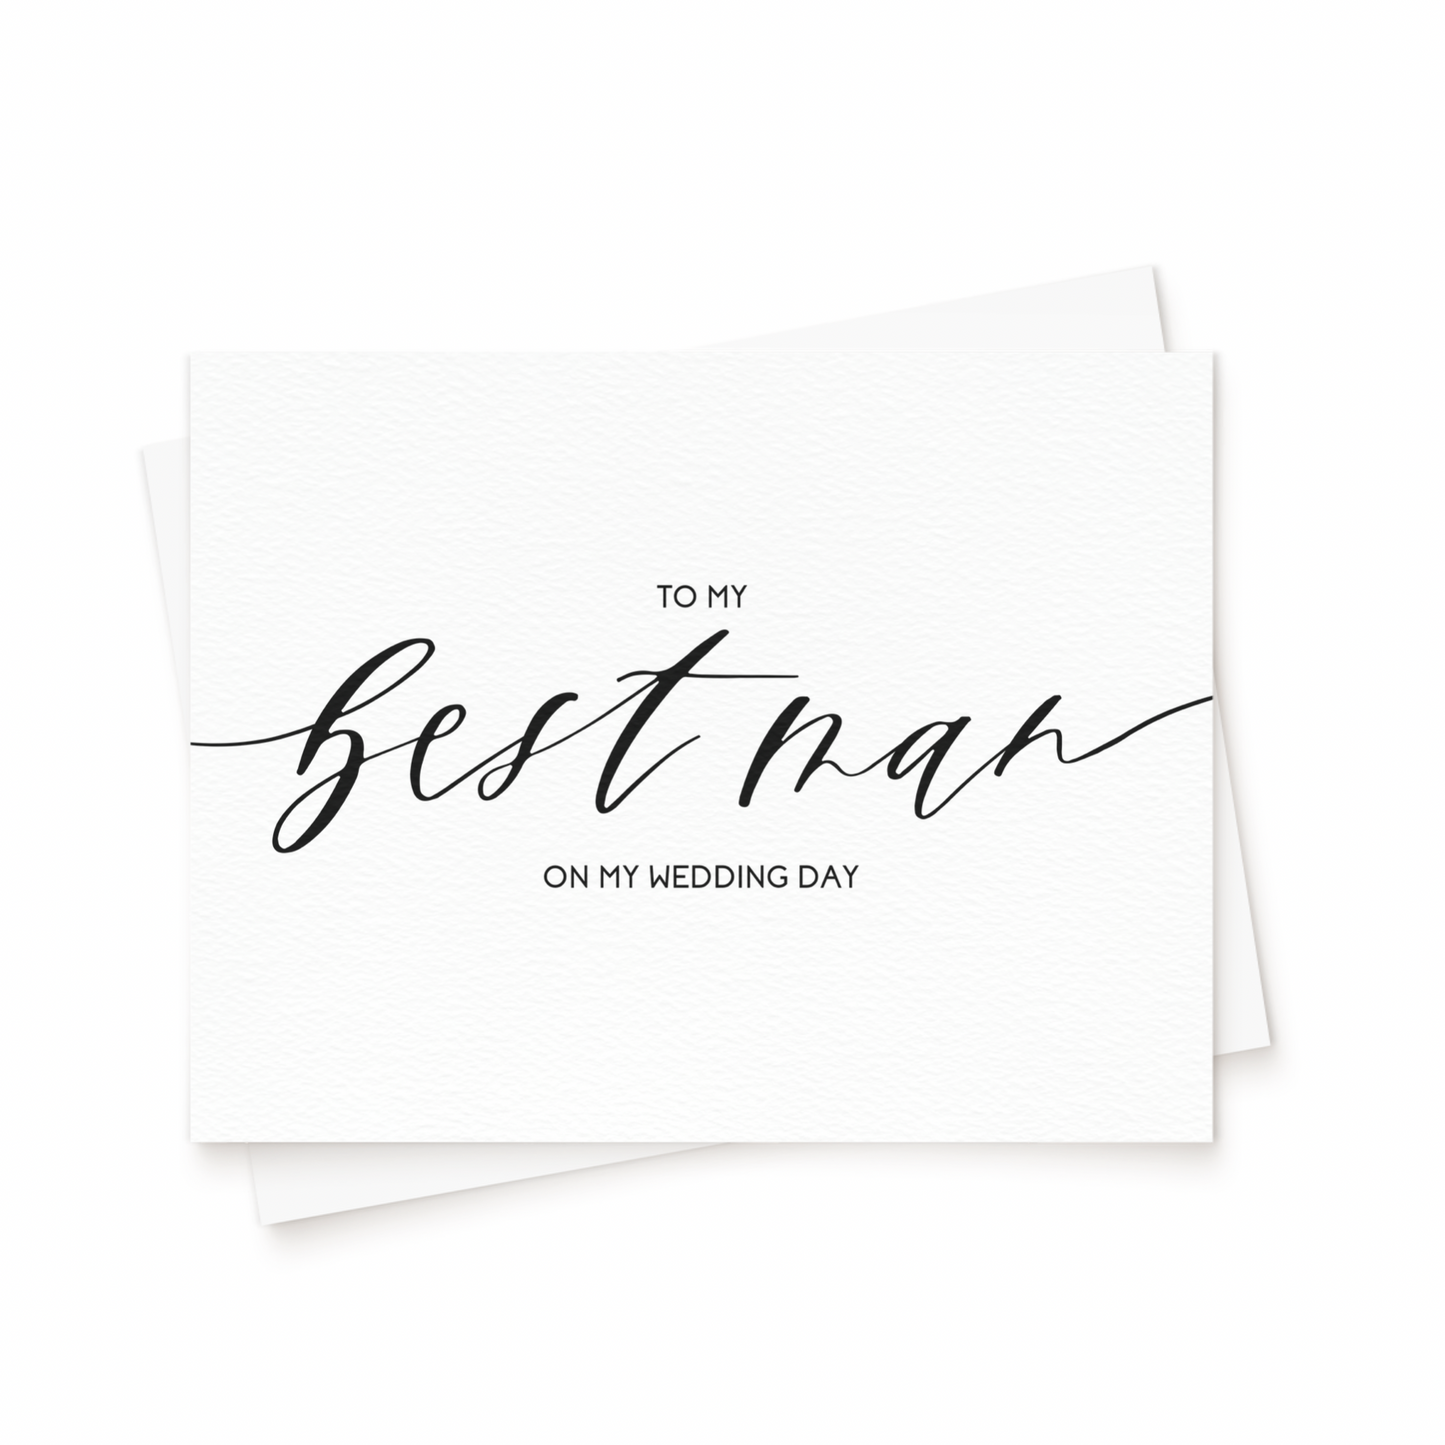 The Wedding Day Card